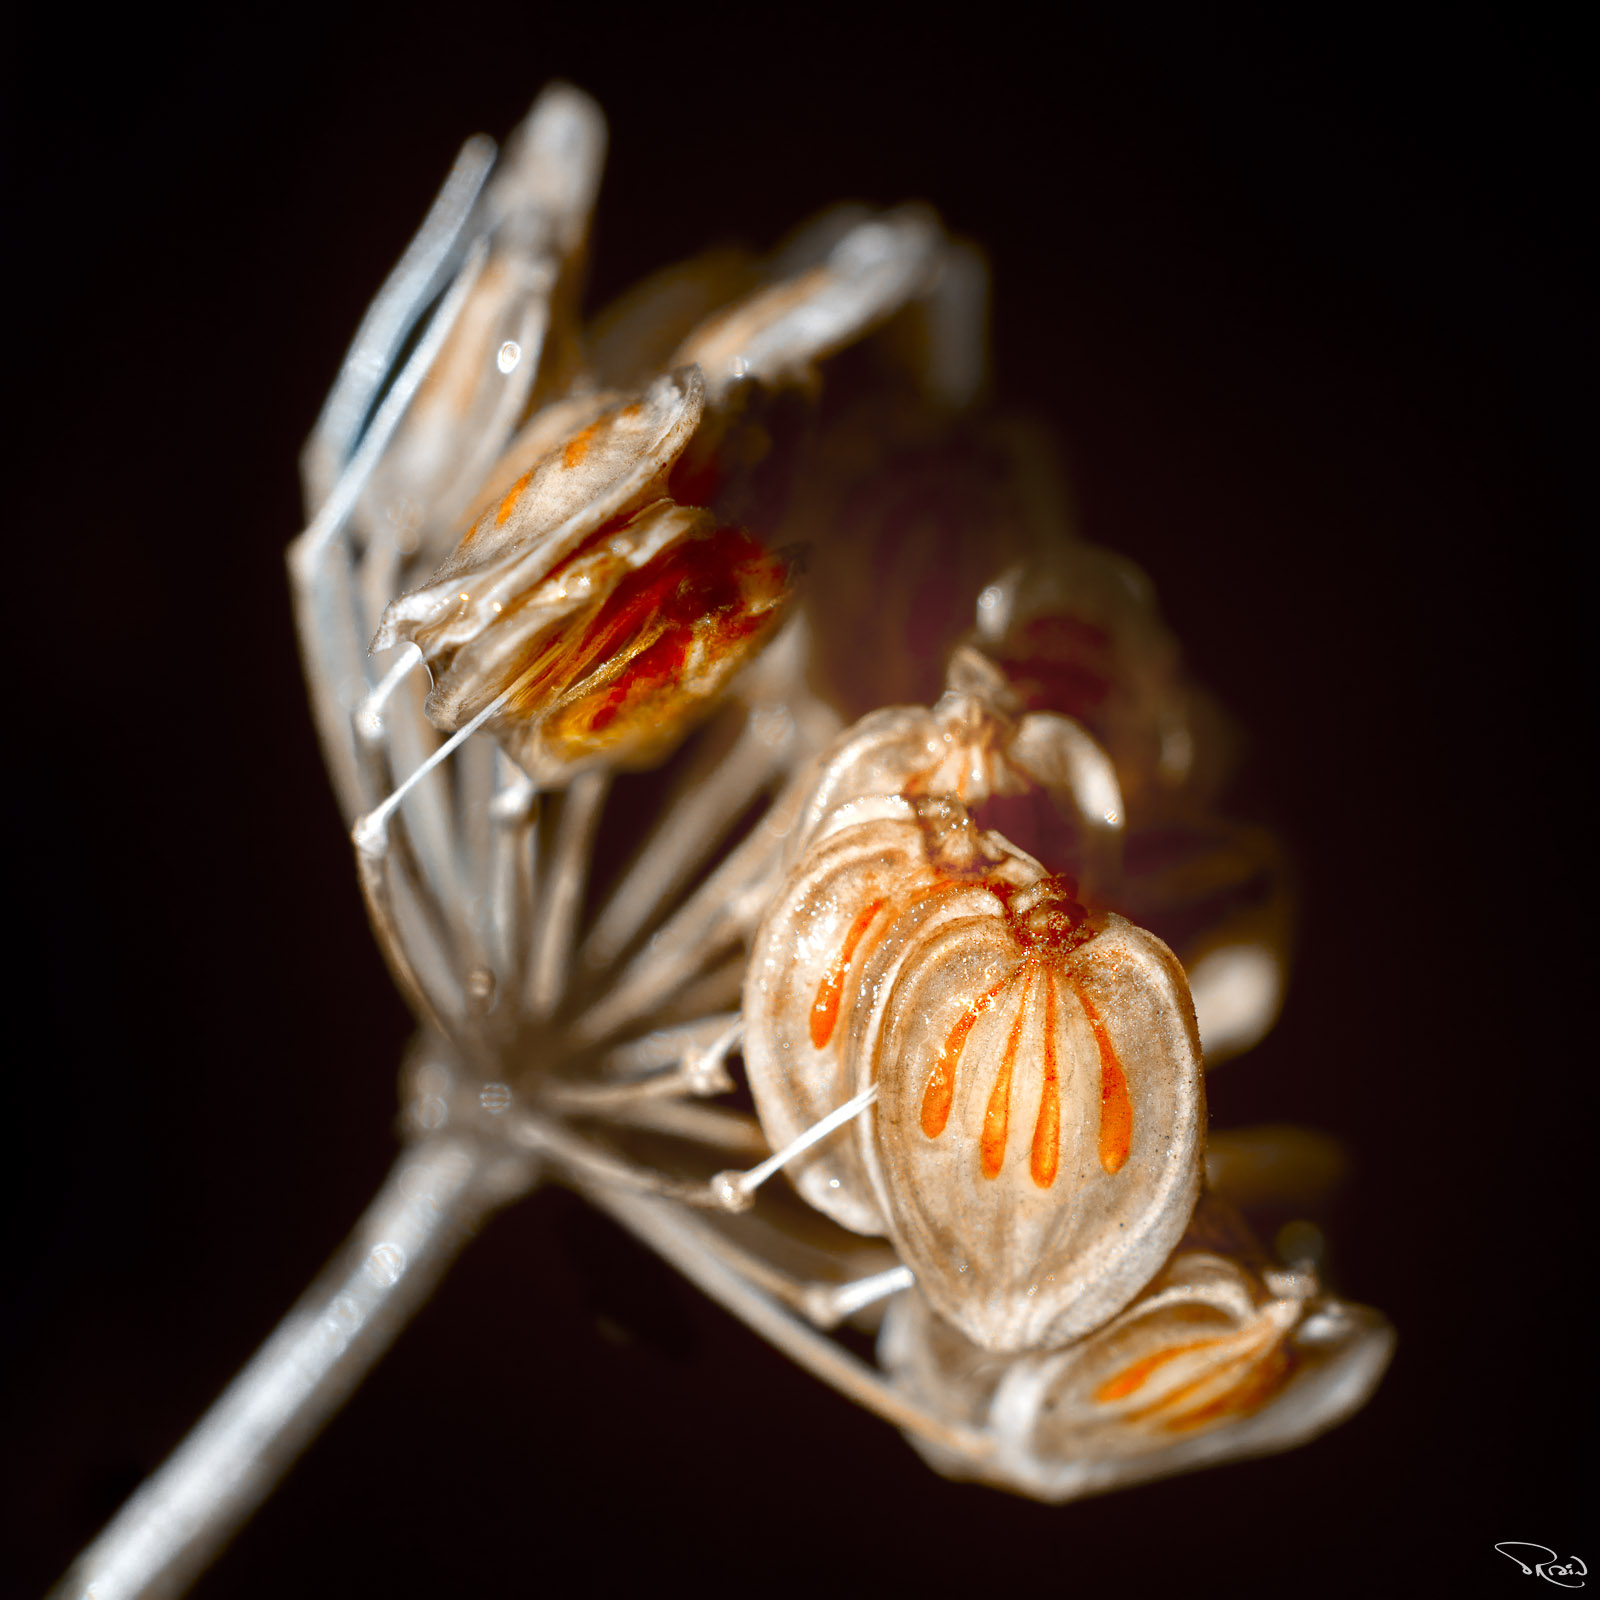 An macro image of an umbellet of fennel seeds, transparent from the morning rainstorm, shows off its colorful internal structures.  